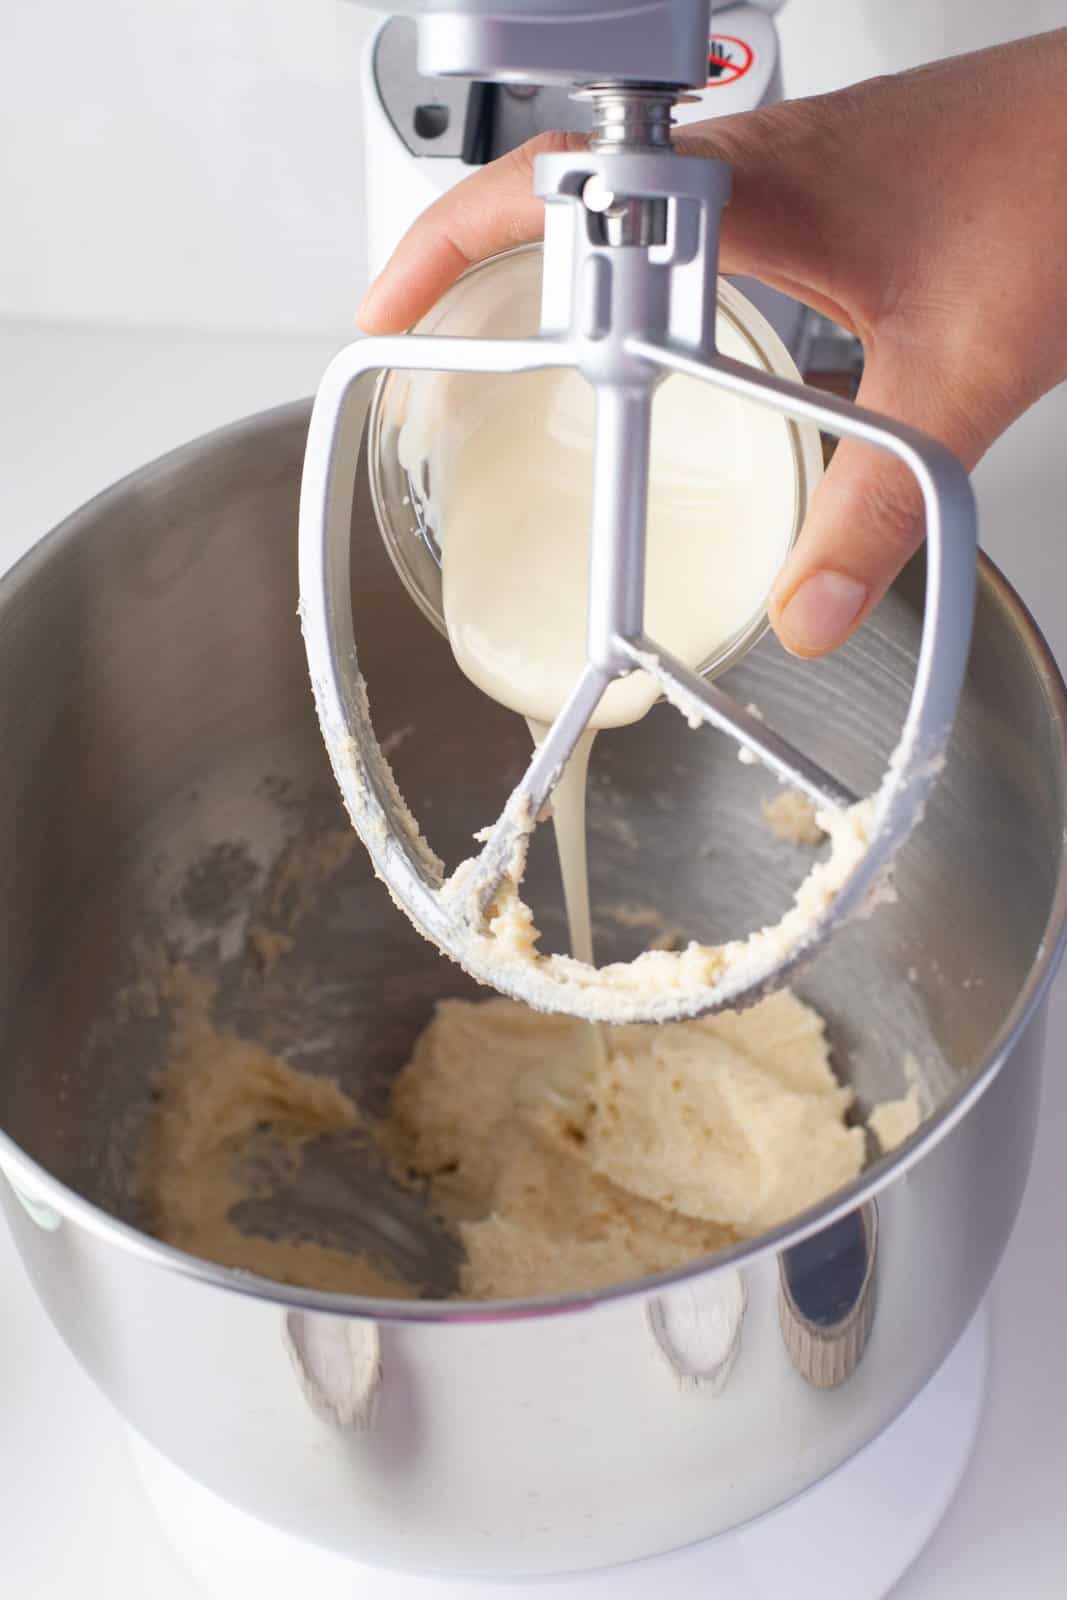 White chocolate added to stand mixer.